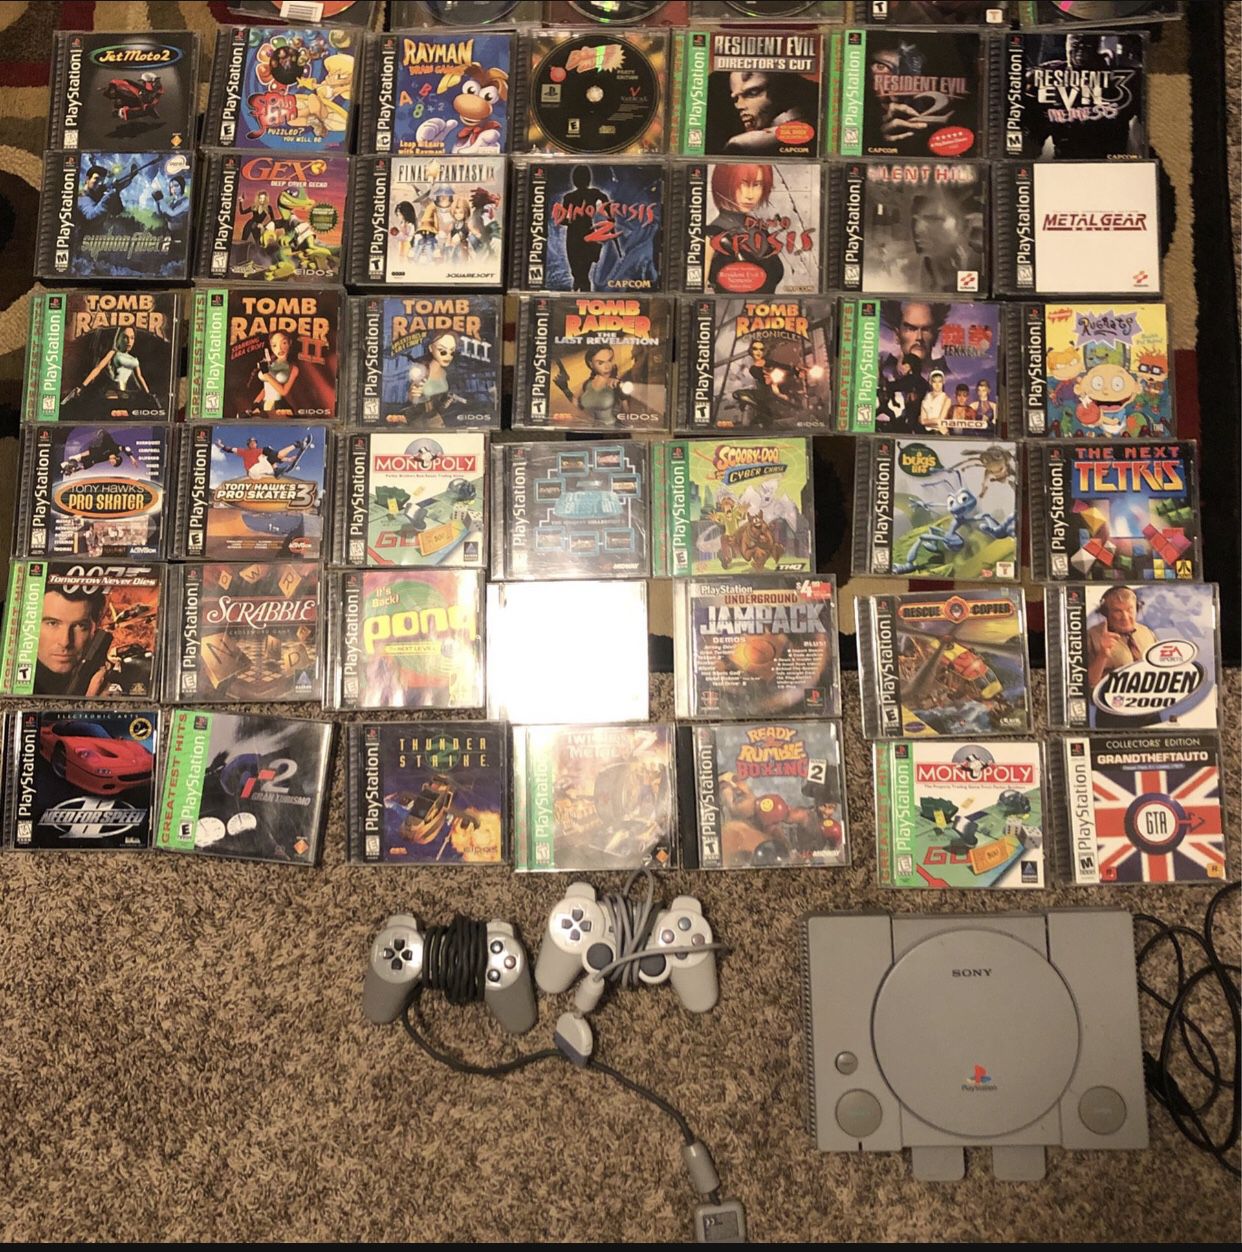 PlayStation 1 With 47 Games (Silent Hill, Resident Evil, Dino Crisis 2, Etc)